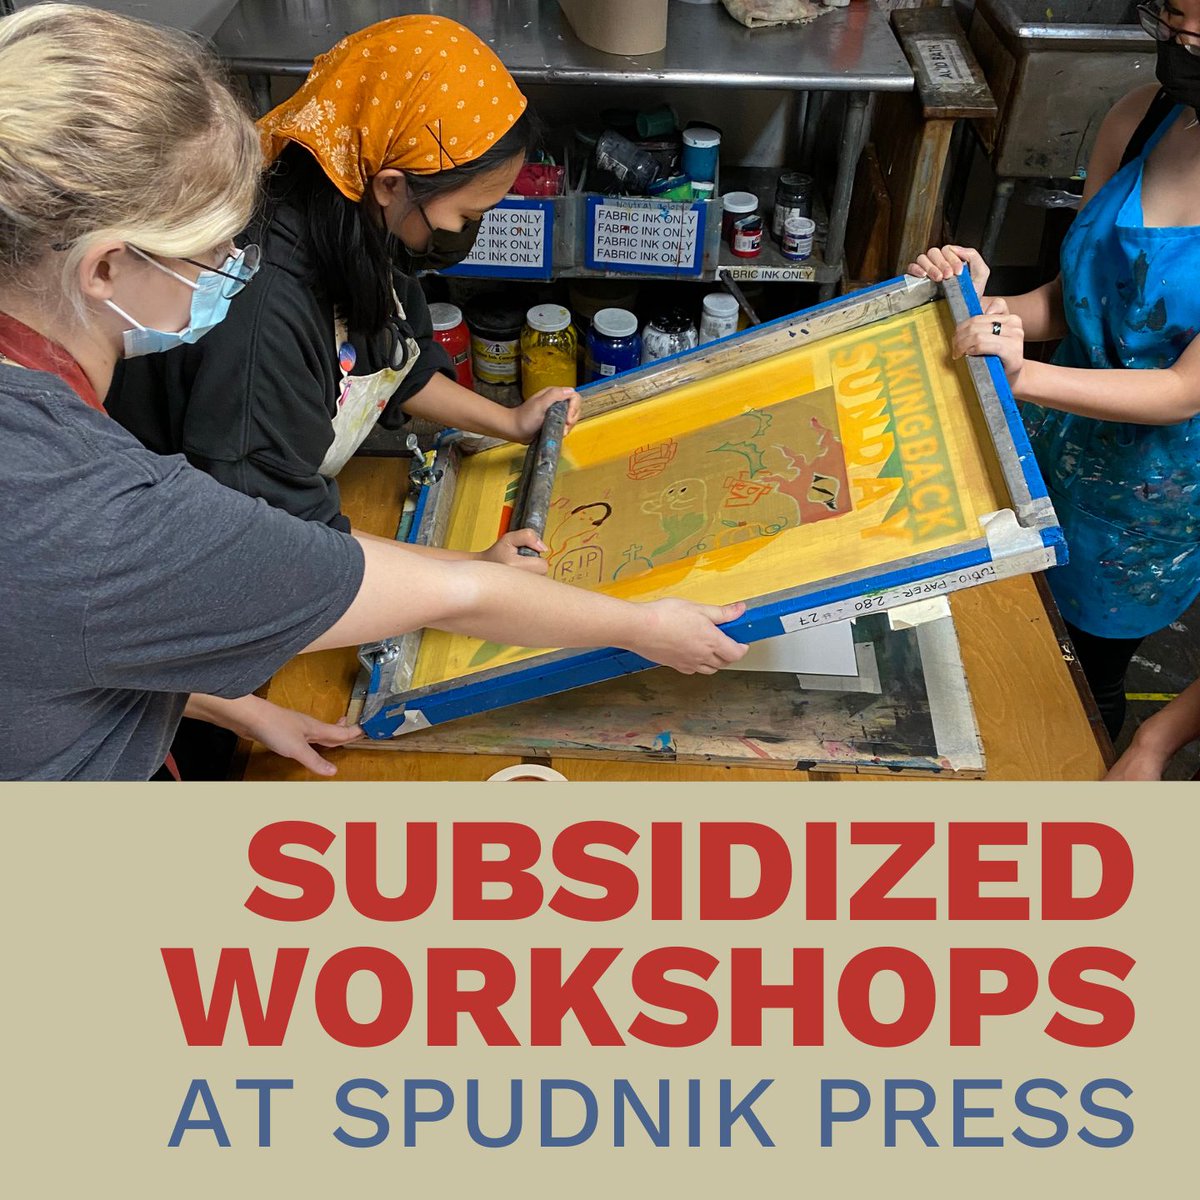 👋 Application period for a Subsidized Workshop at Spudnik Press is extended! Nominate your organization today at buff.ly/3JzLEm2 

We are currently offering two fully-funded workshops to two selected organizations. #printmaking #freeworkshop #chicagononprofit